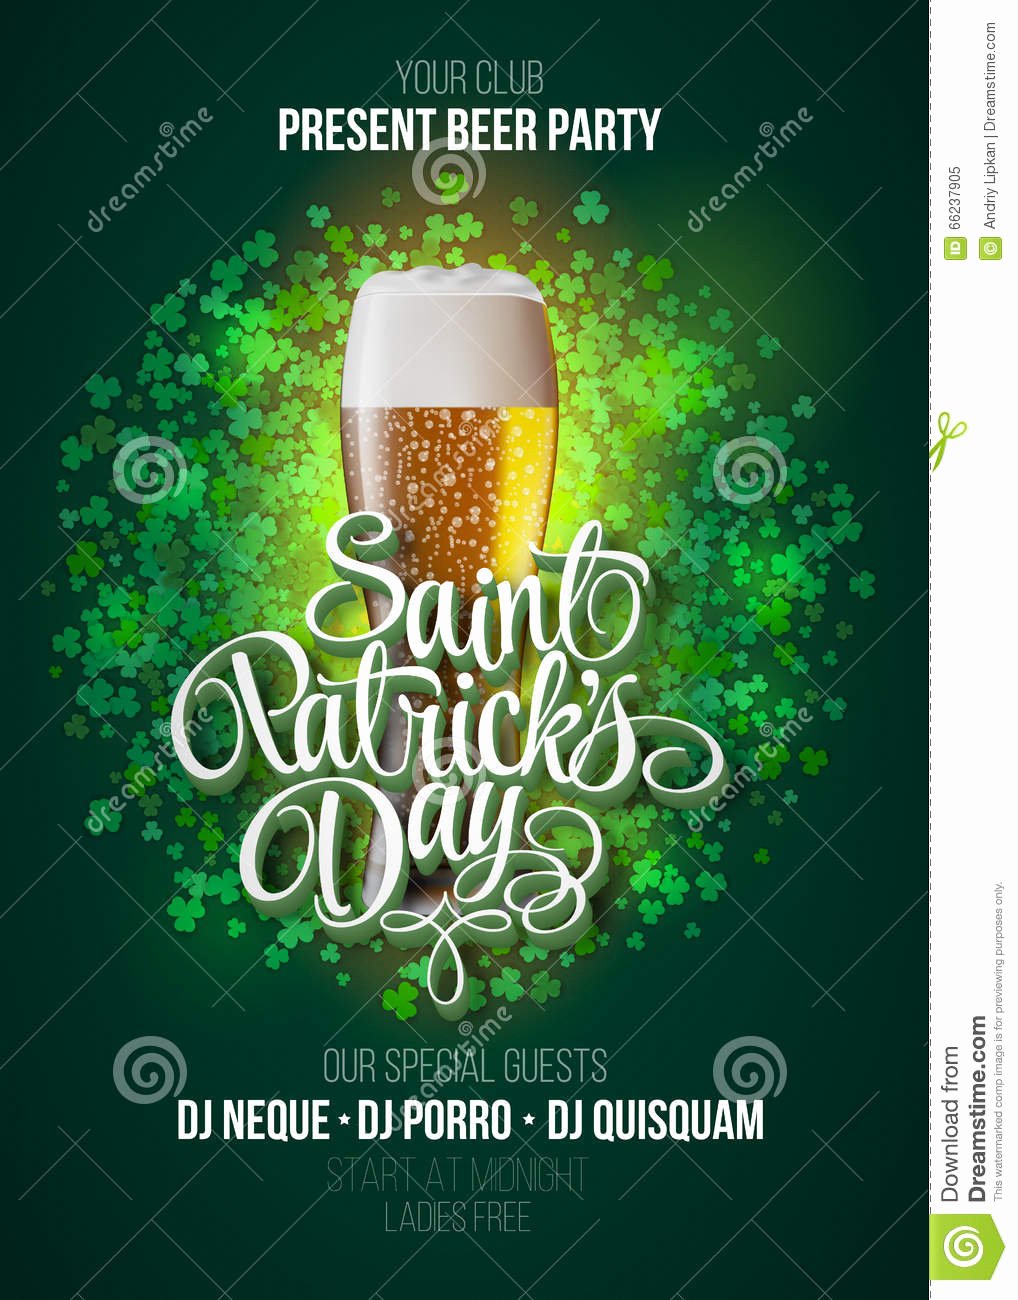 St Patrick Day Posters Lovely St Patrick S Day Poster Beer Party Green Background with